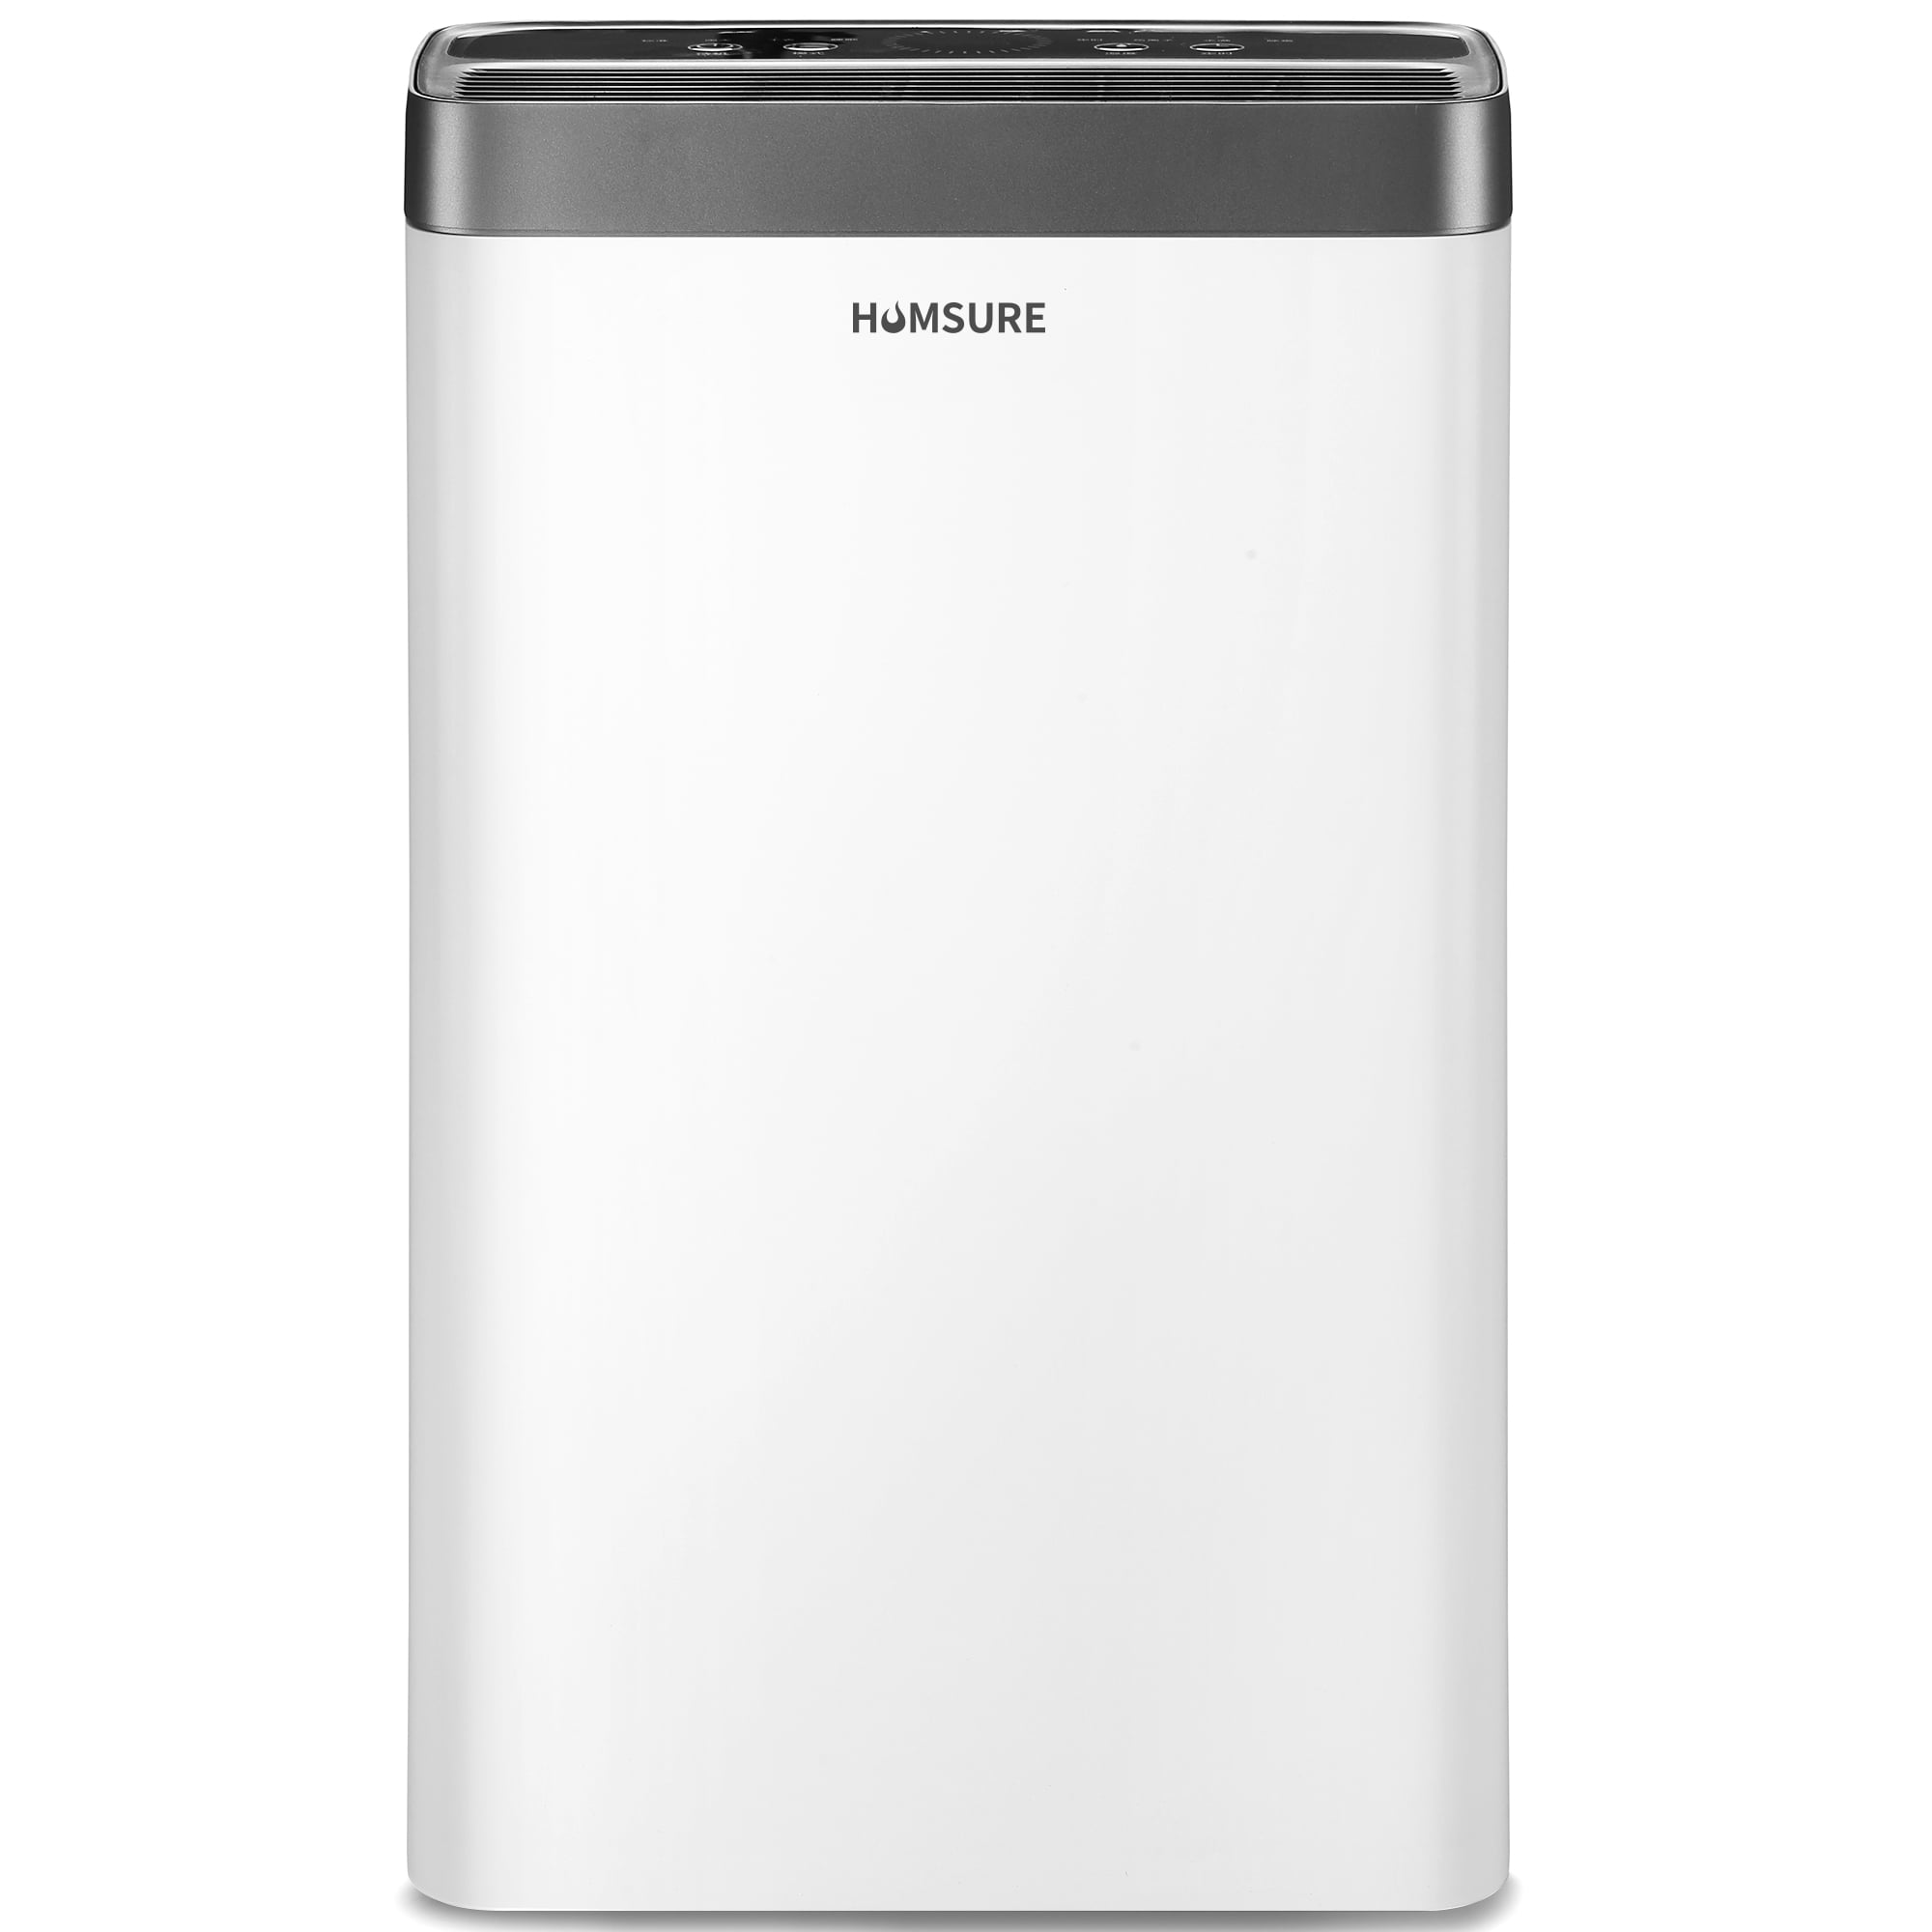 HUMSURE 30 Pints Portable Dehumidifier with Drain Hose